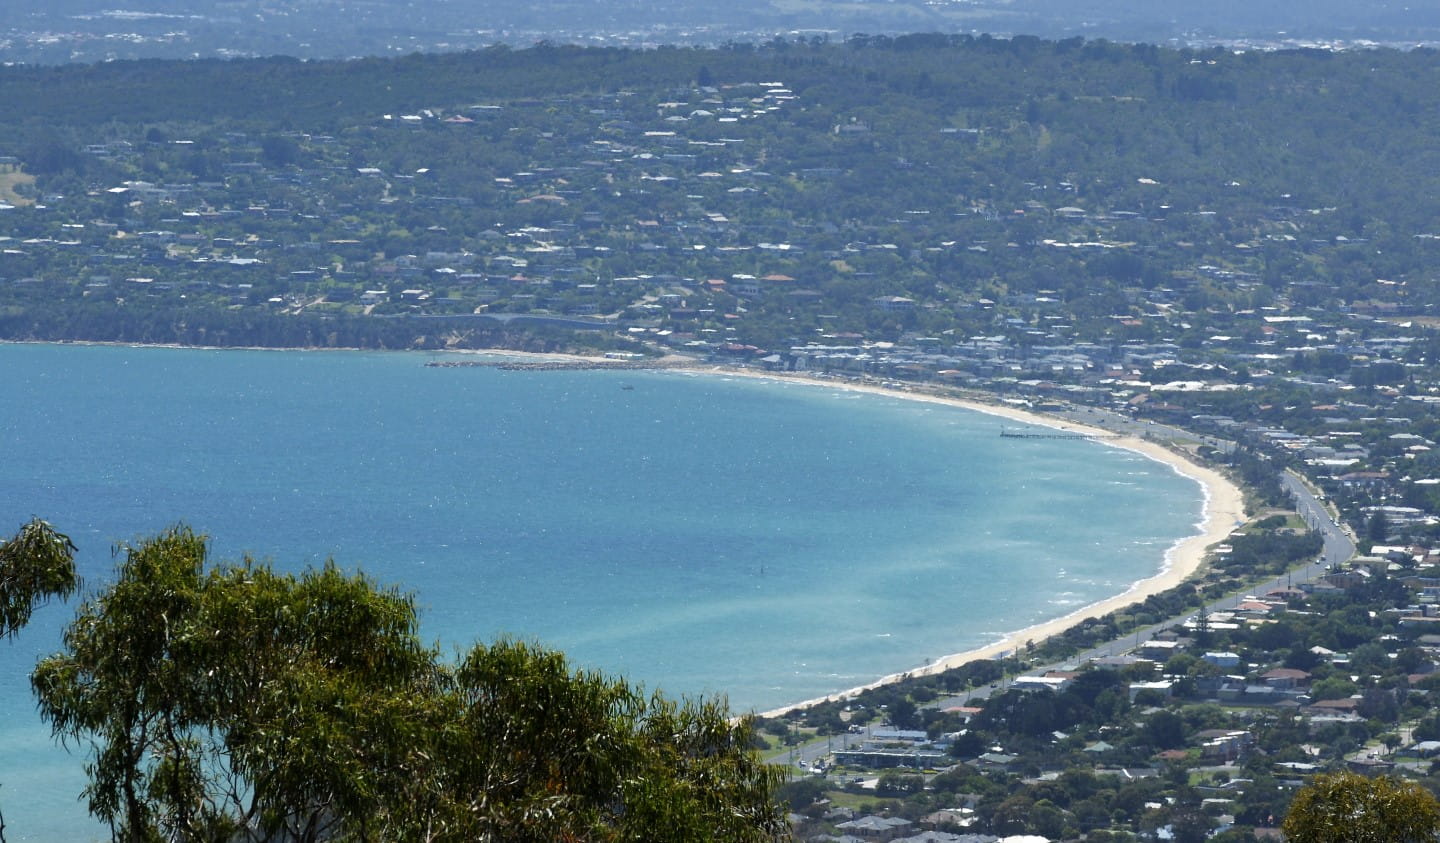 The views from Arthurs Seat State Park are astounding.